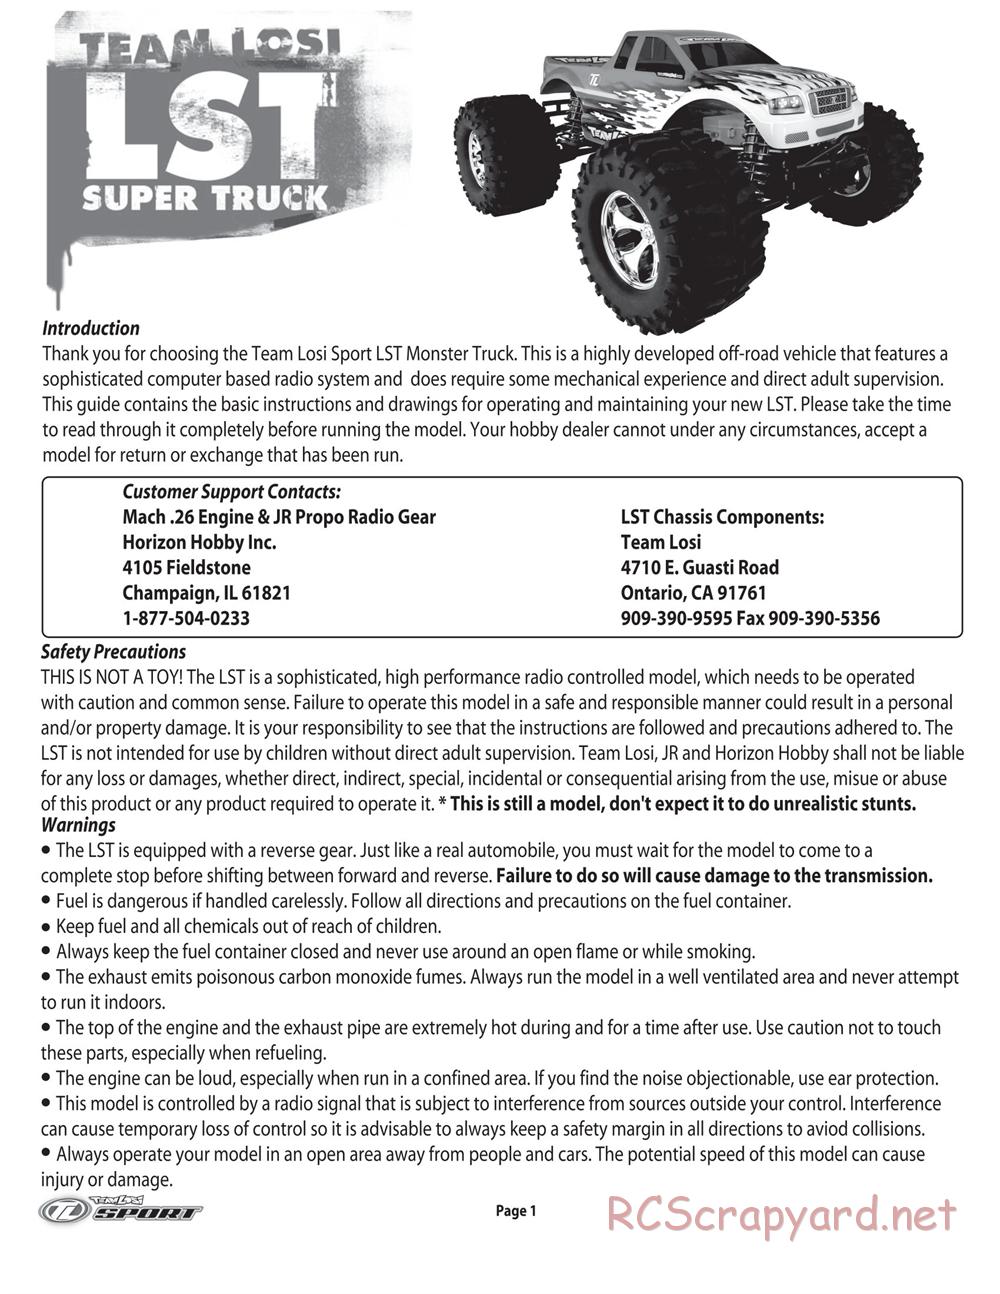 Team Losi - LST Super Truck - Manual - Page 2